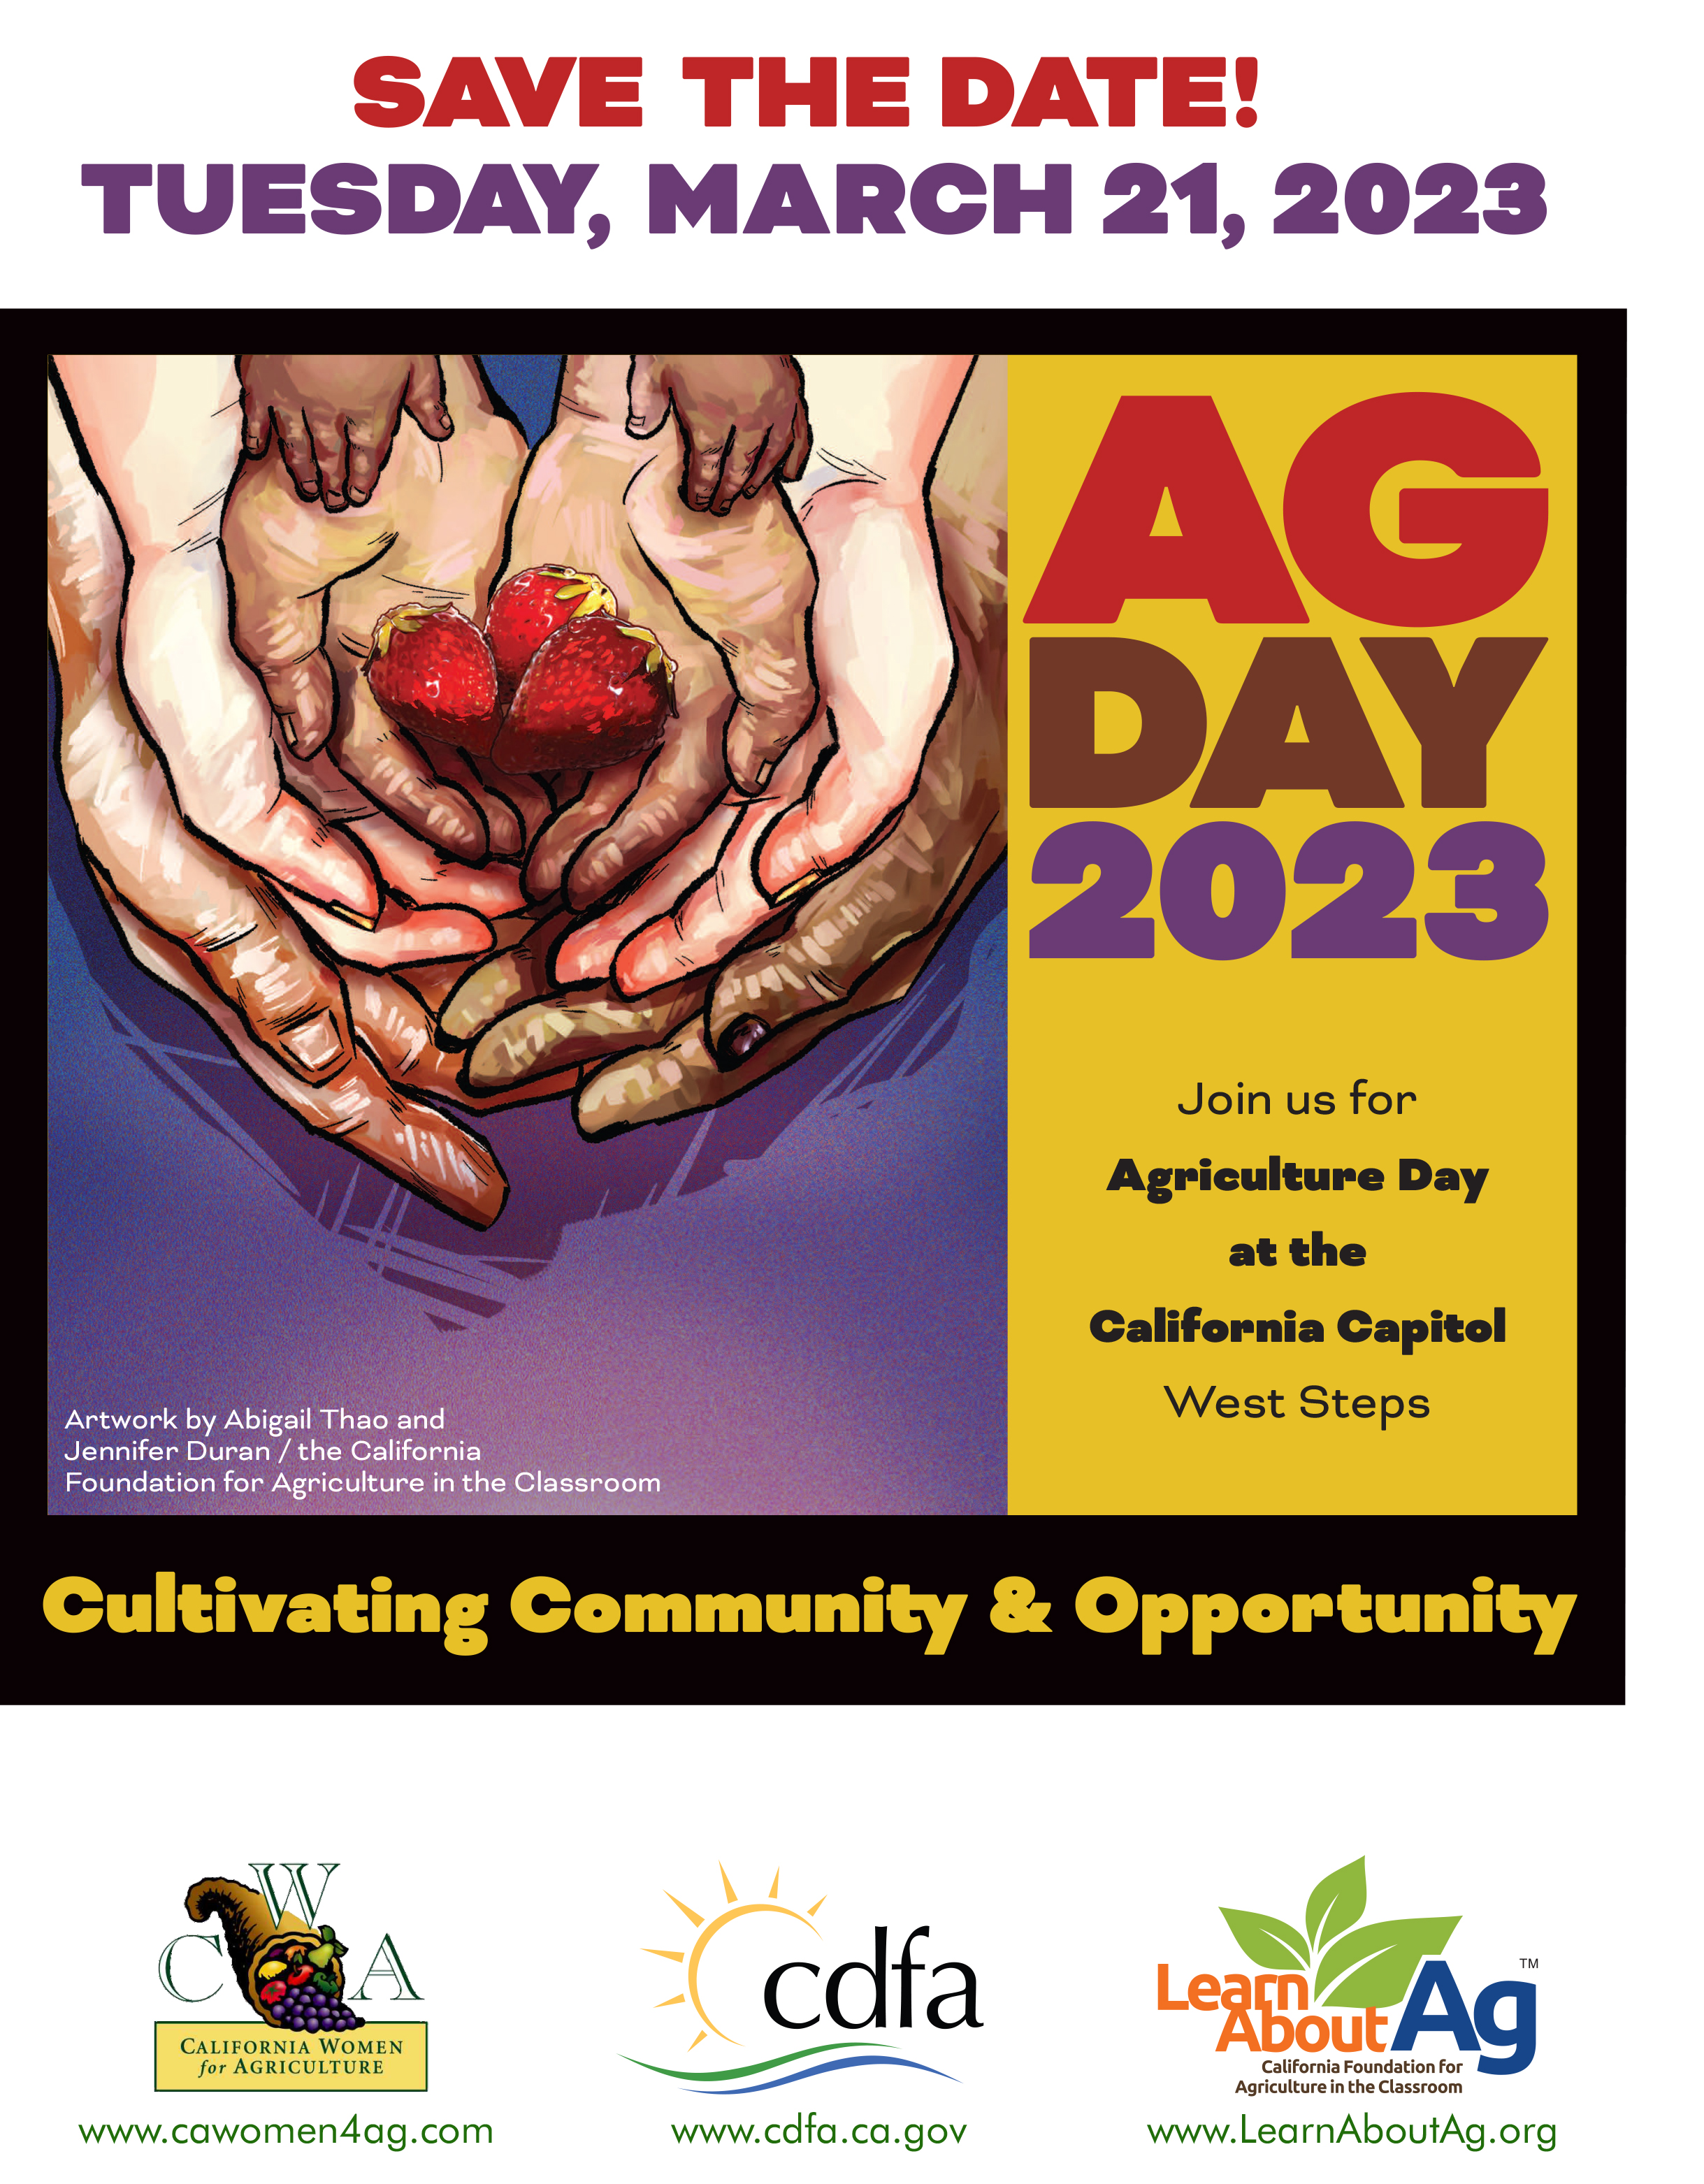 Ag Day 2023 on Wednesday, March 21, 2023